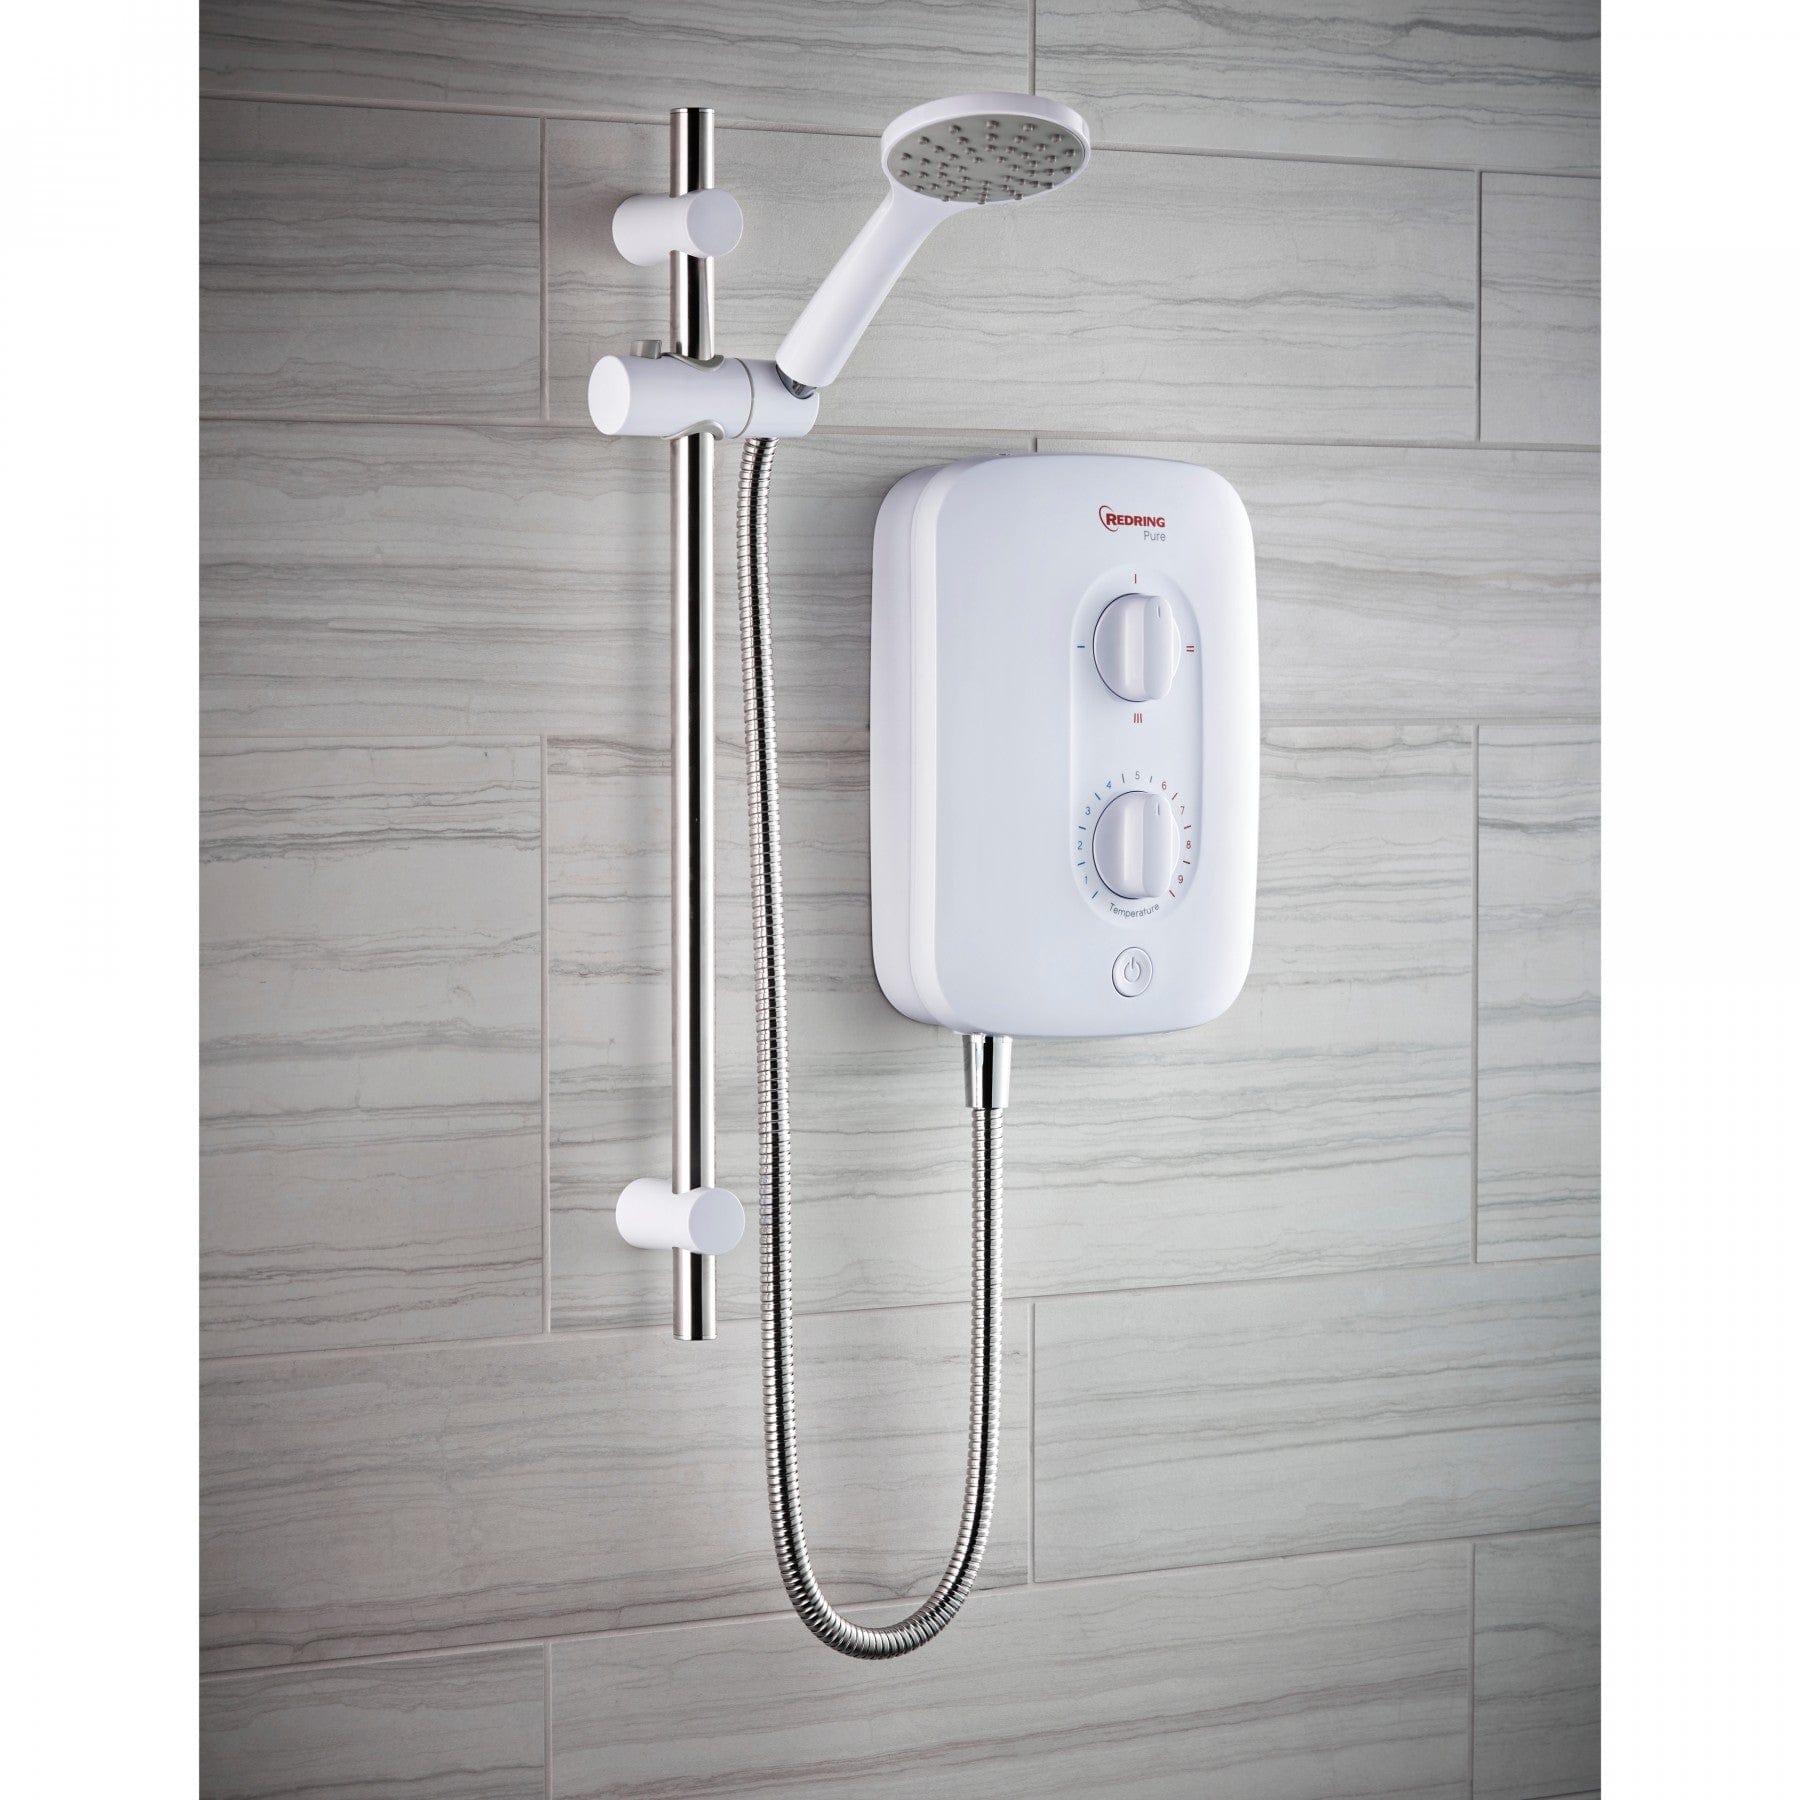 Redring Pure 8.5kW Instantaneous Electric Shower | Supply Master | Accra, Ghana Water Heater Buy Tools hardware Building materials